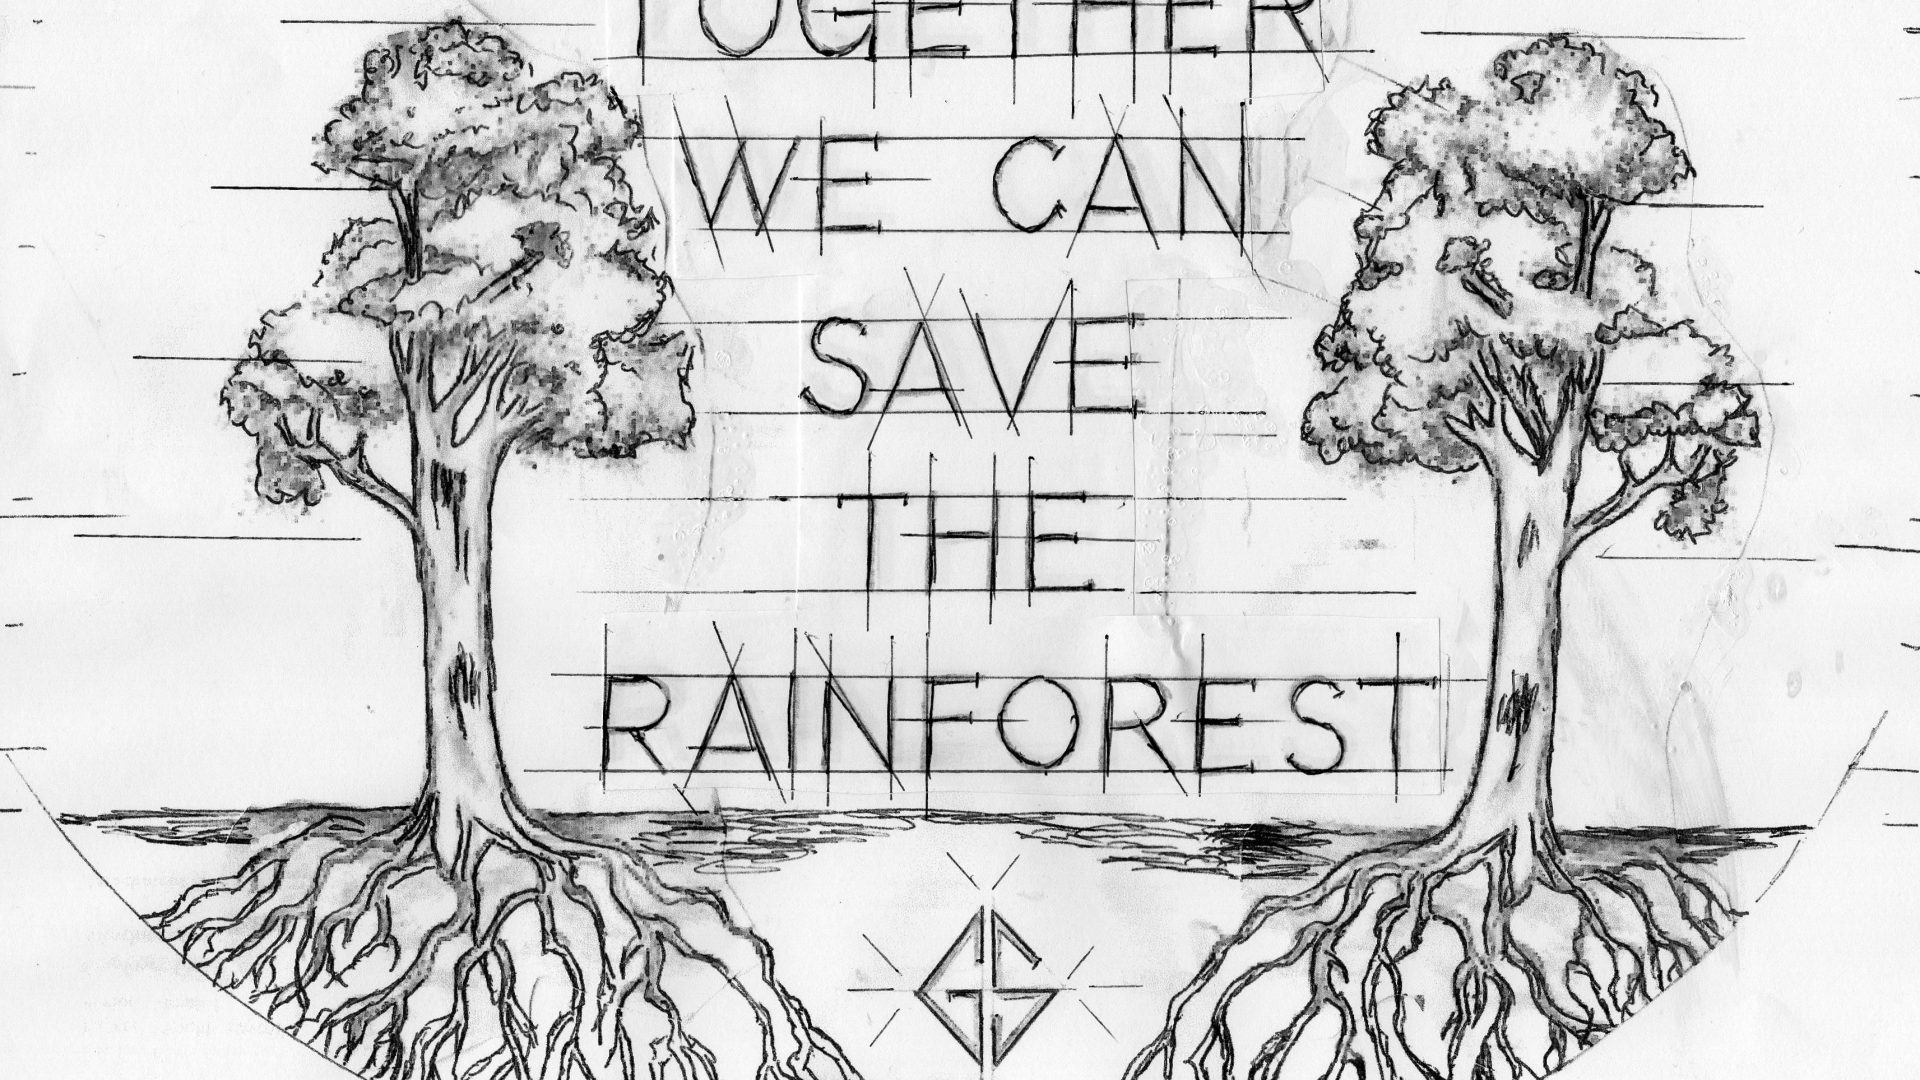 Mico pin engraving. Reads: TOGETHER WE CAN SAVE THE RAINFOREST